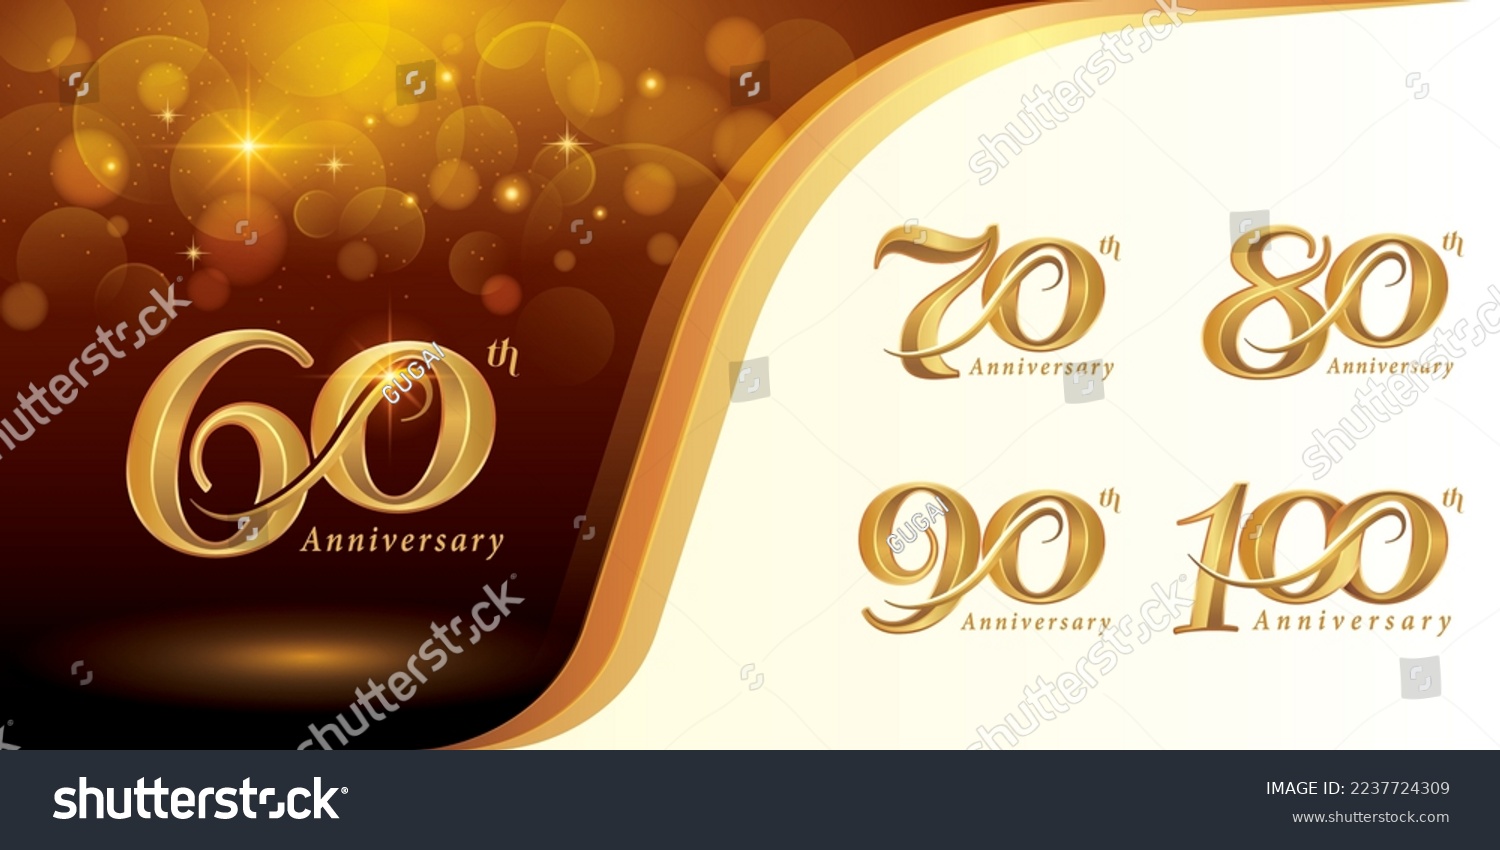 SVG of Set of 60 to 100 years Anniversary logo design, Sixty to Hundred years Celebrating Anniversary Logo,  Gold Elegant Classic Logo for Celebration, 60,70,80,90,100, Luxury and Retro Serif Number Letters, svg